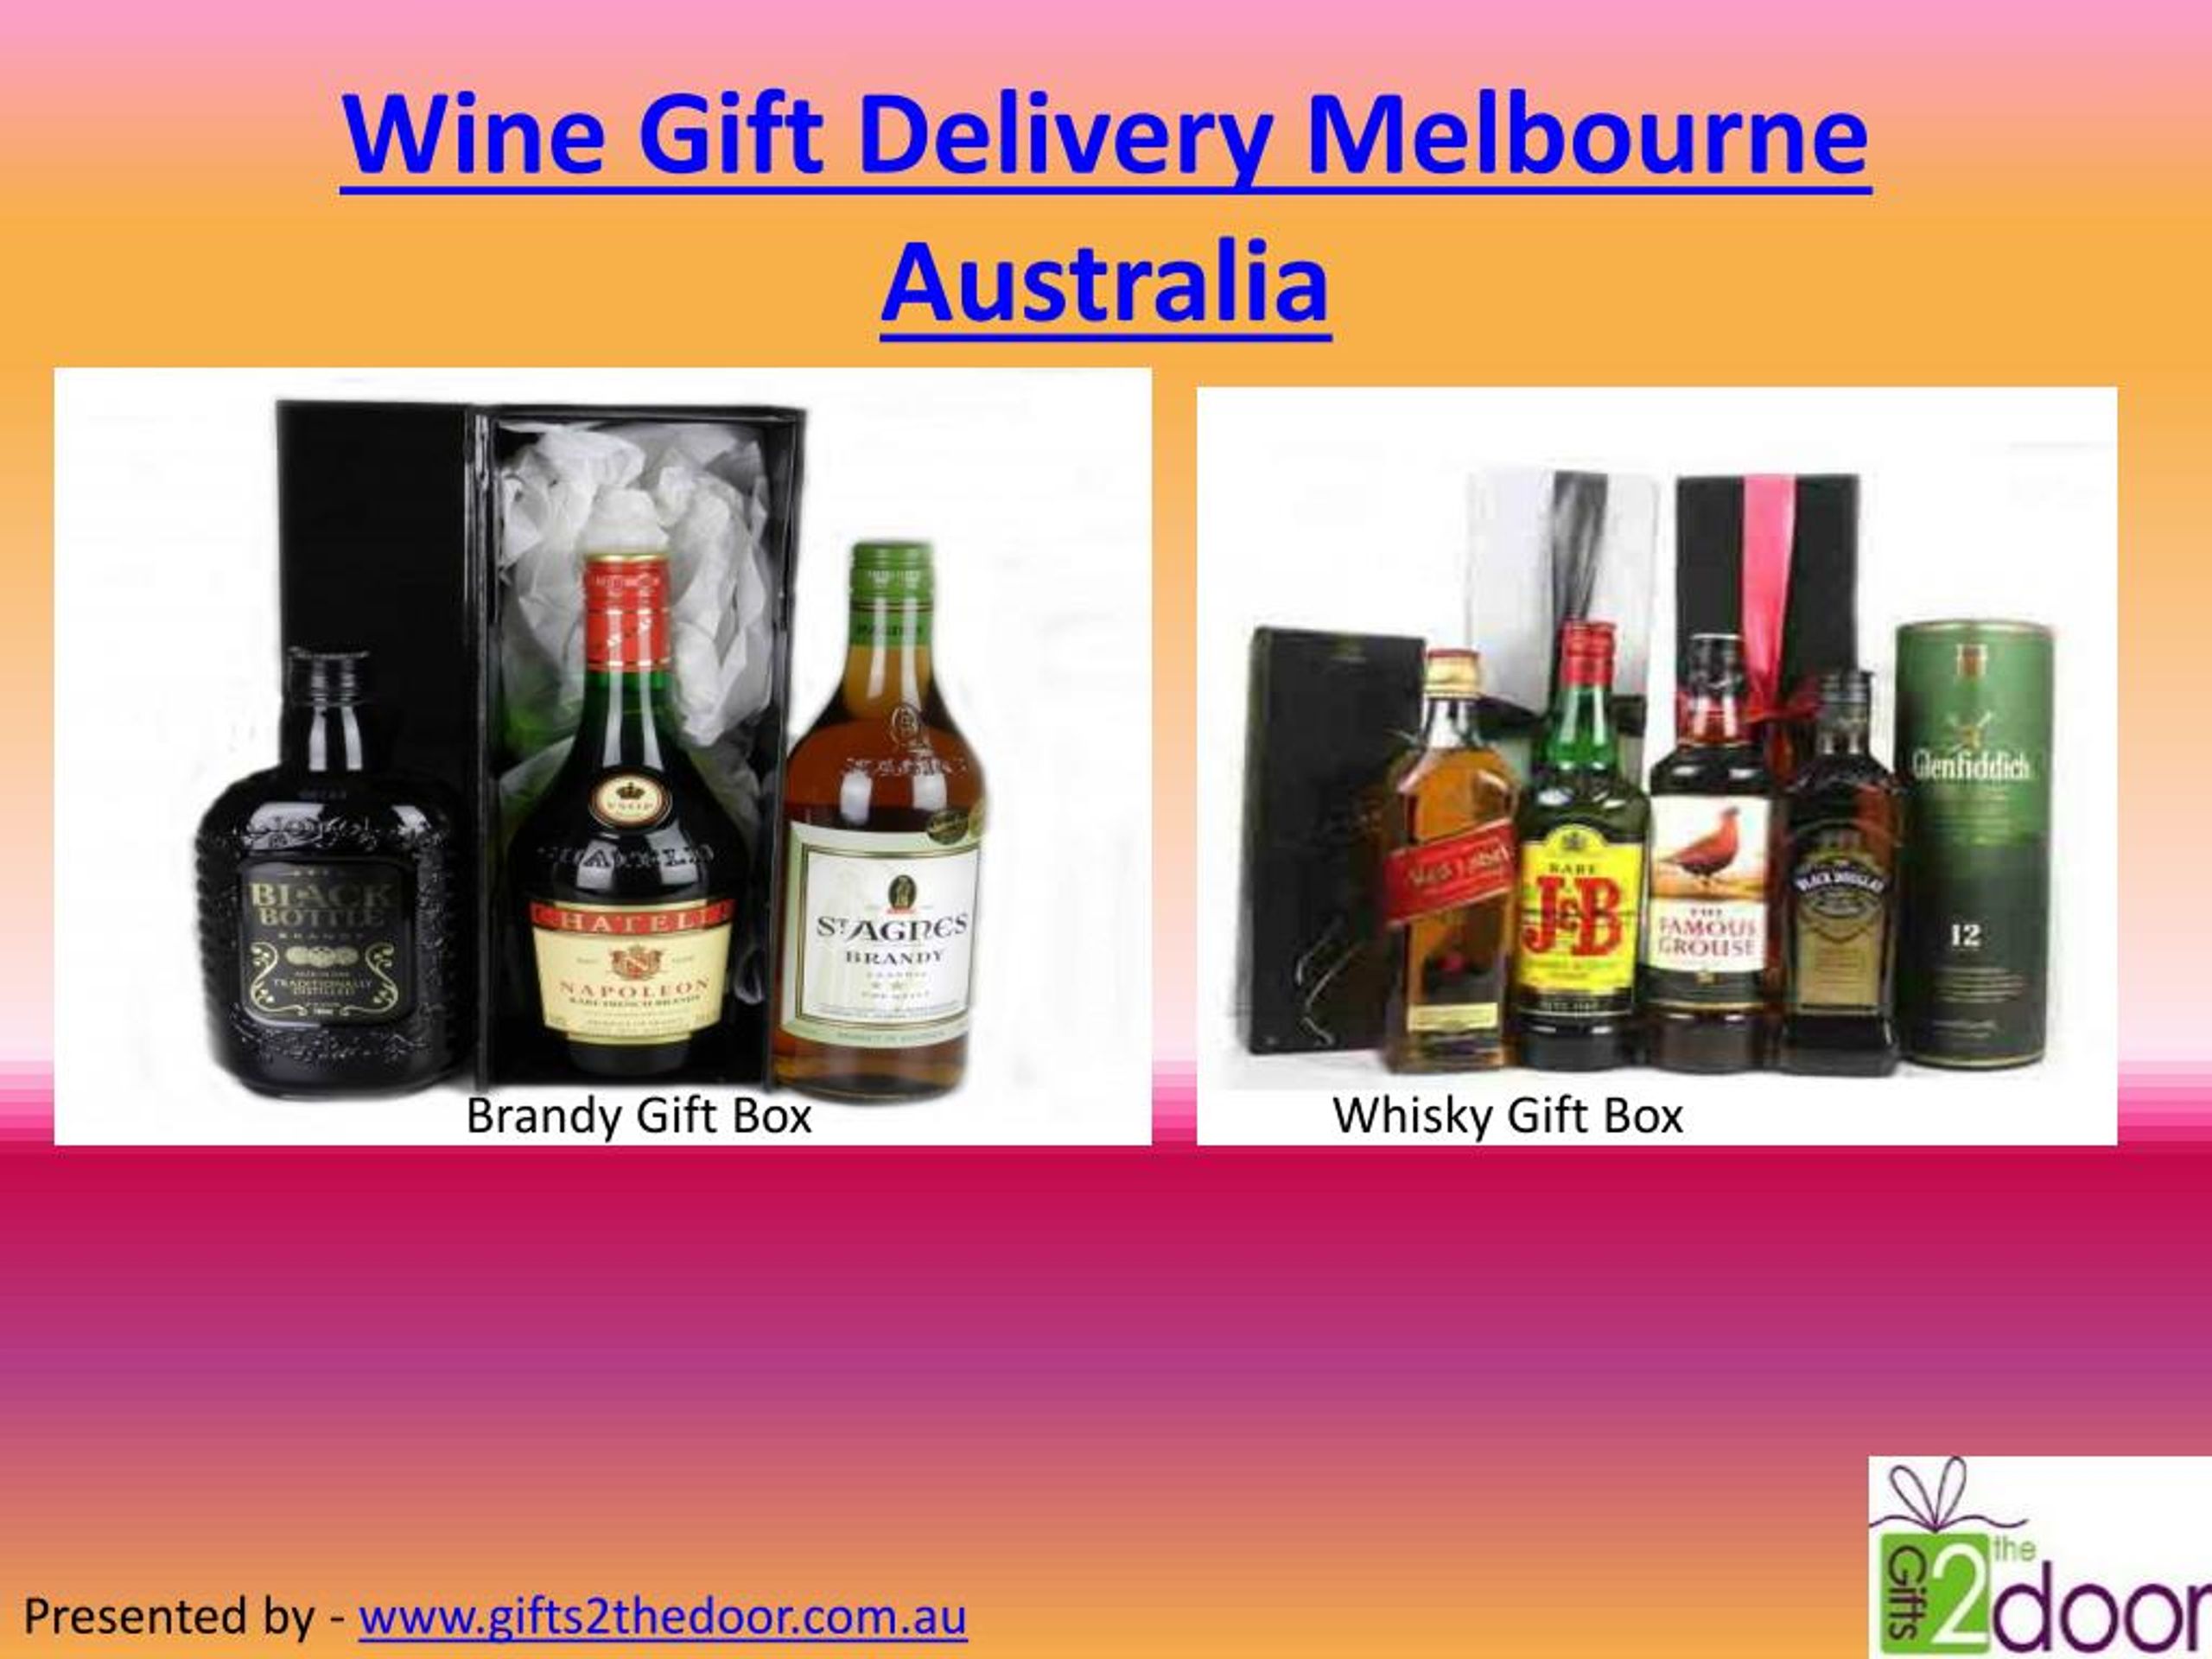 PPT Gift Delivery Melbourne Australia Gifts 2 The Door